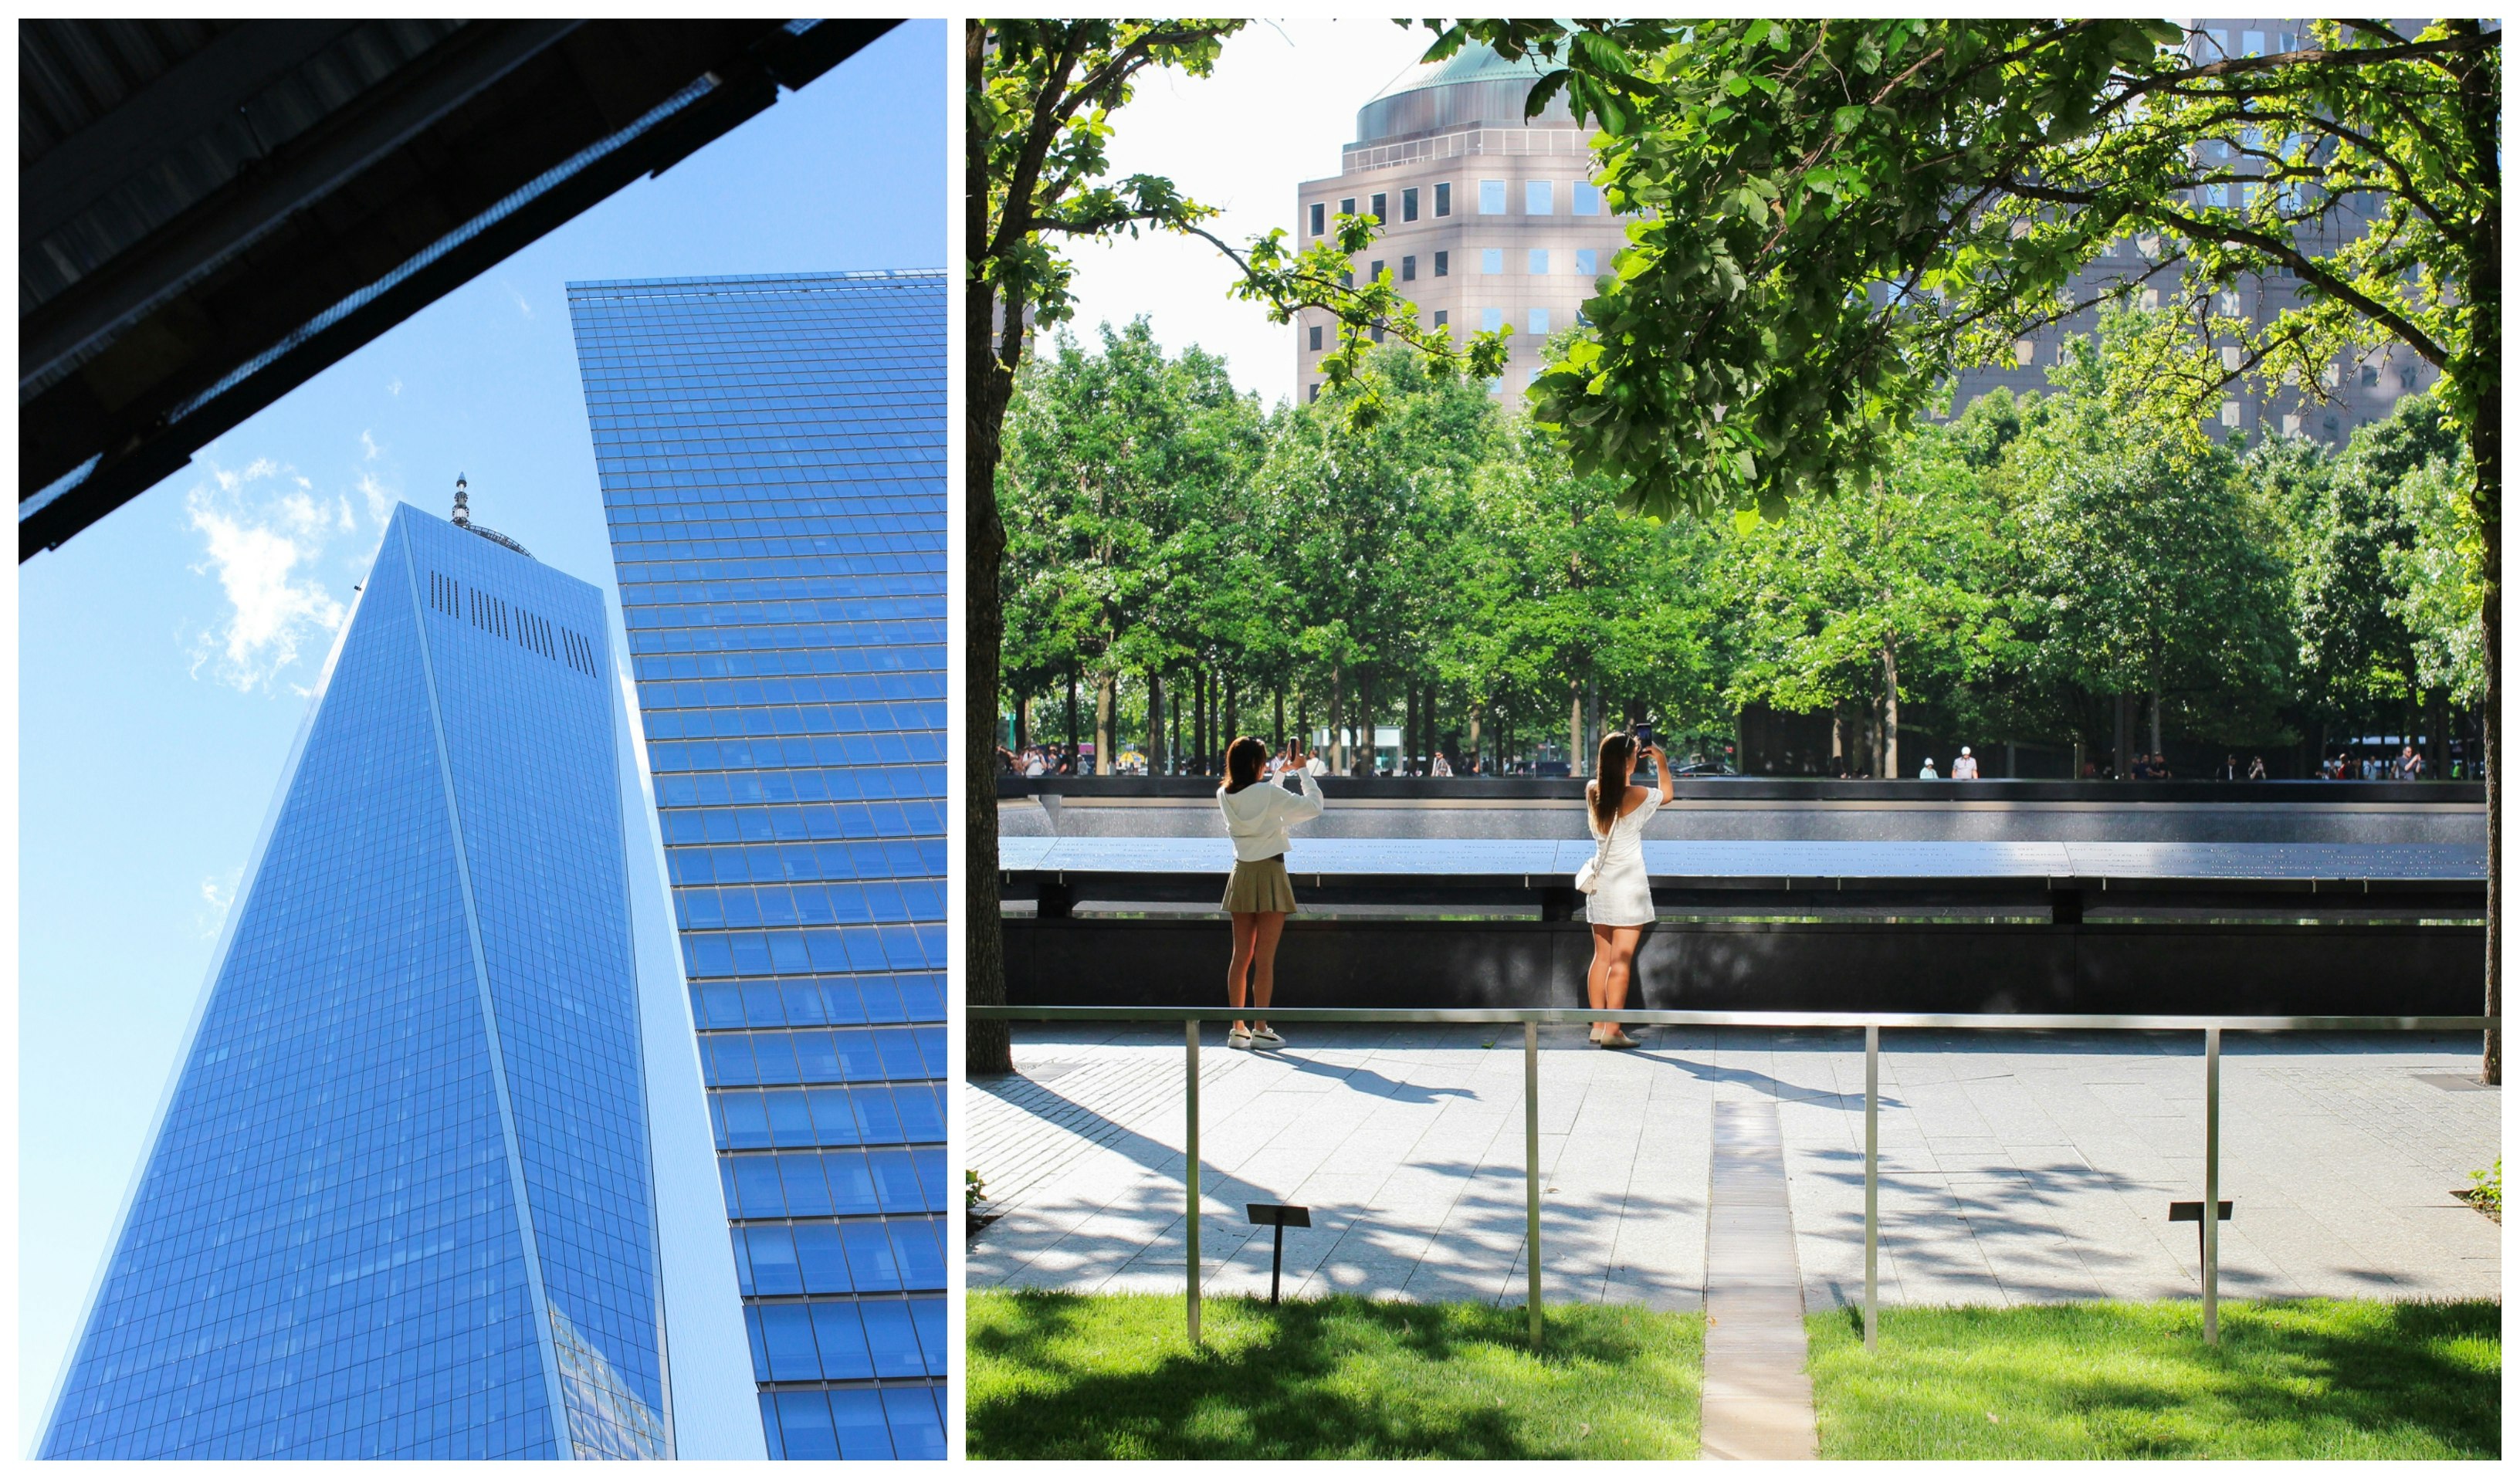 Collage; Left: One World Trade, Right: The September 11 Memorial reflecting pools 